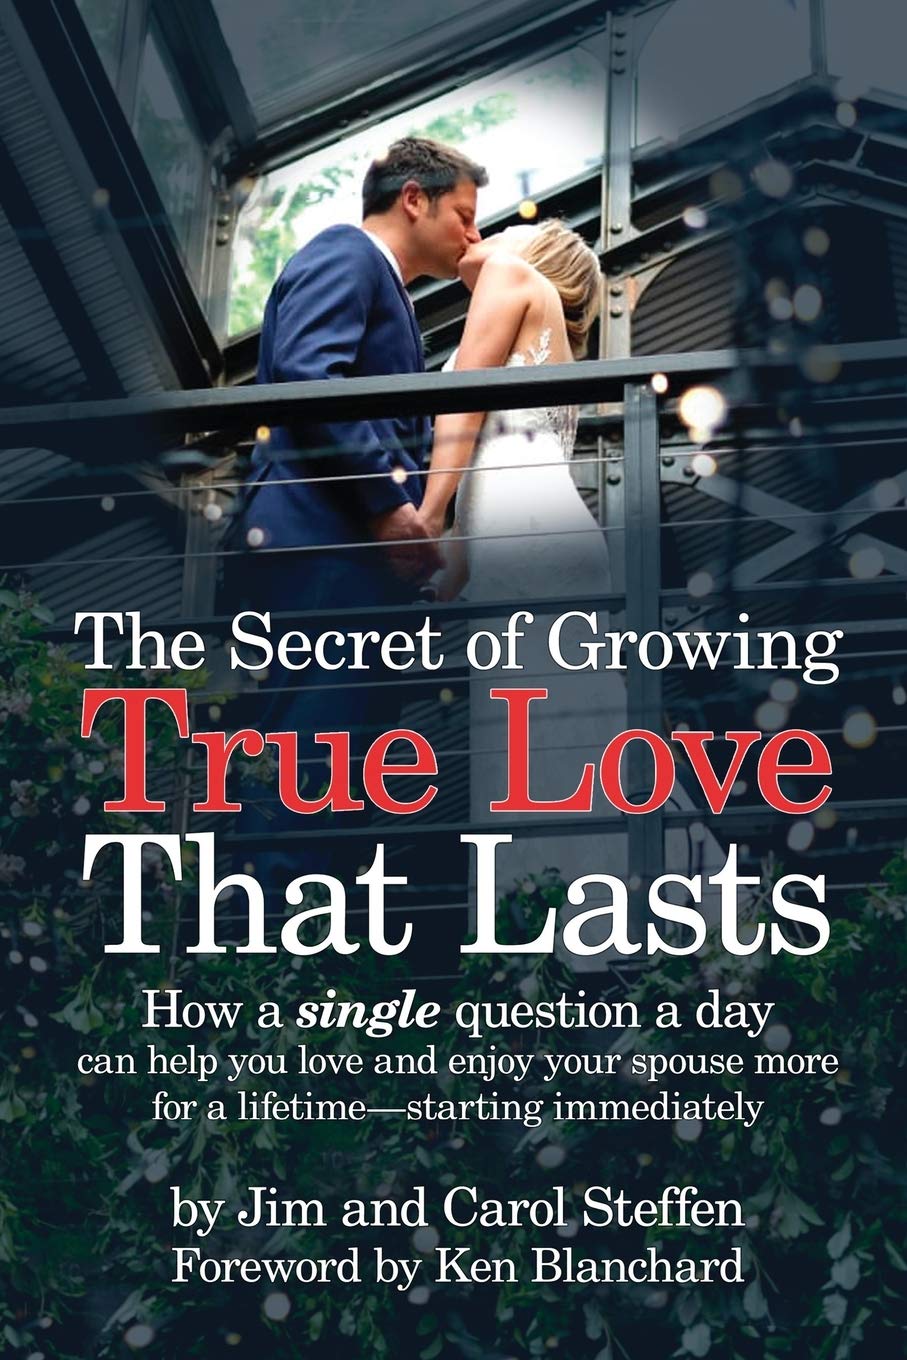 The Secret of Growing True Love That Lasts - Jim and Carol Steffen